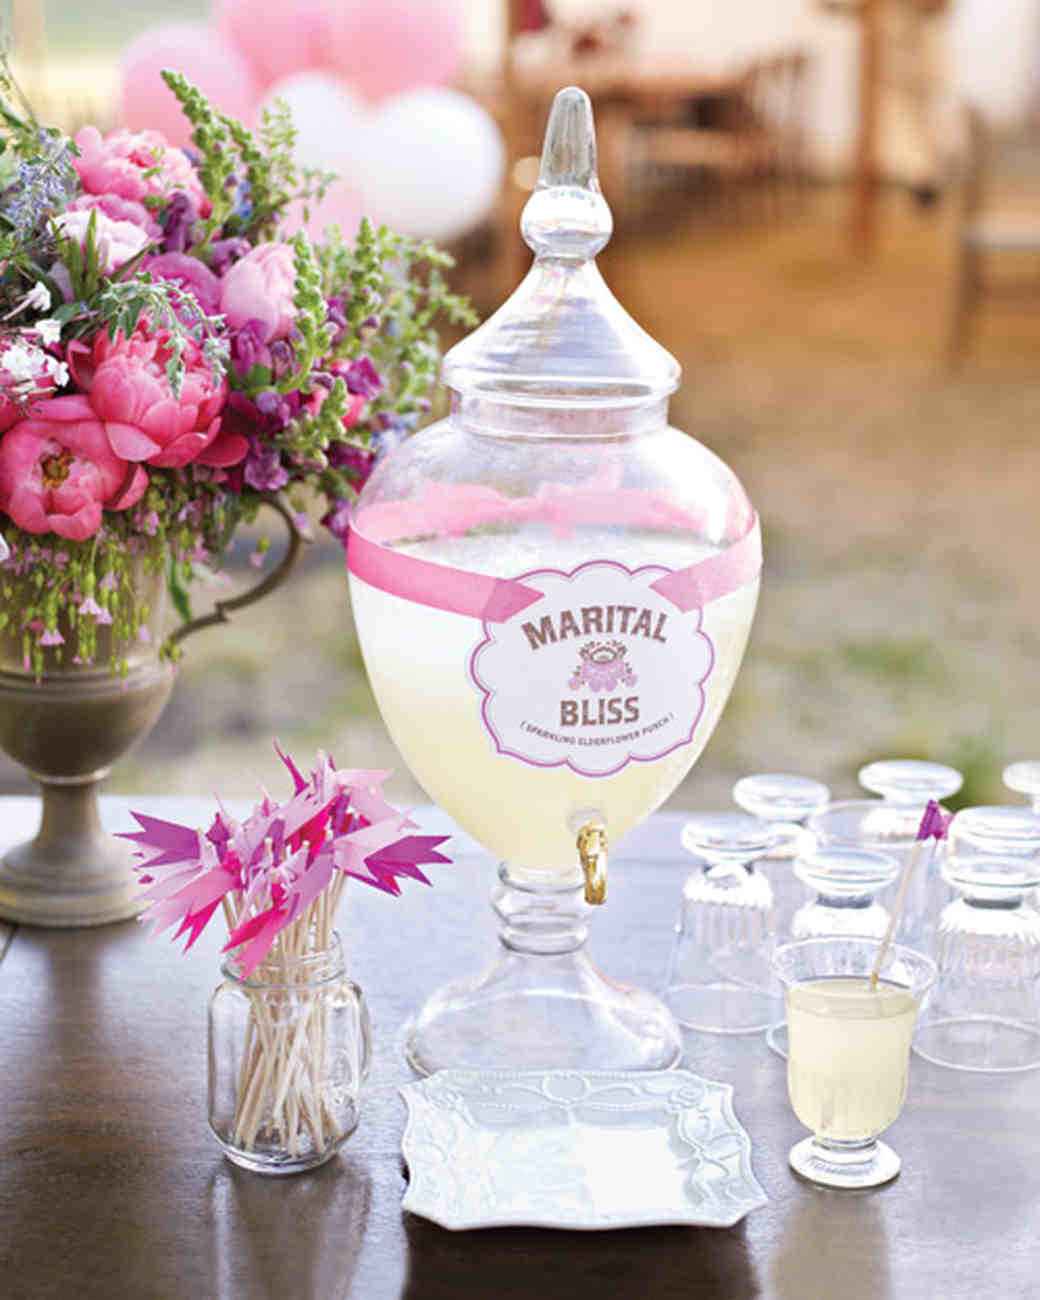 Engagement Cocktail Party Ideas
 Marital Bliss Cocktail Recipe and Drink Label How To